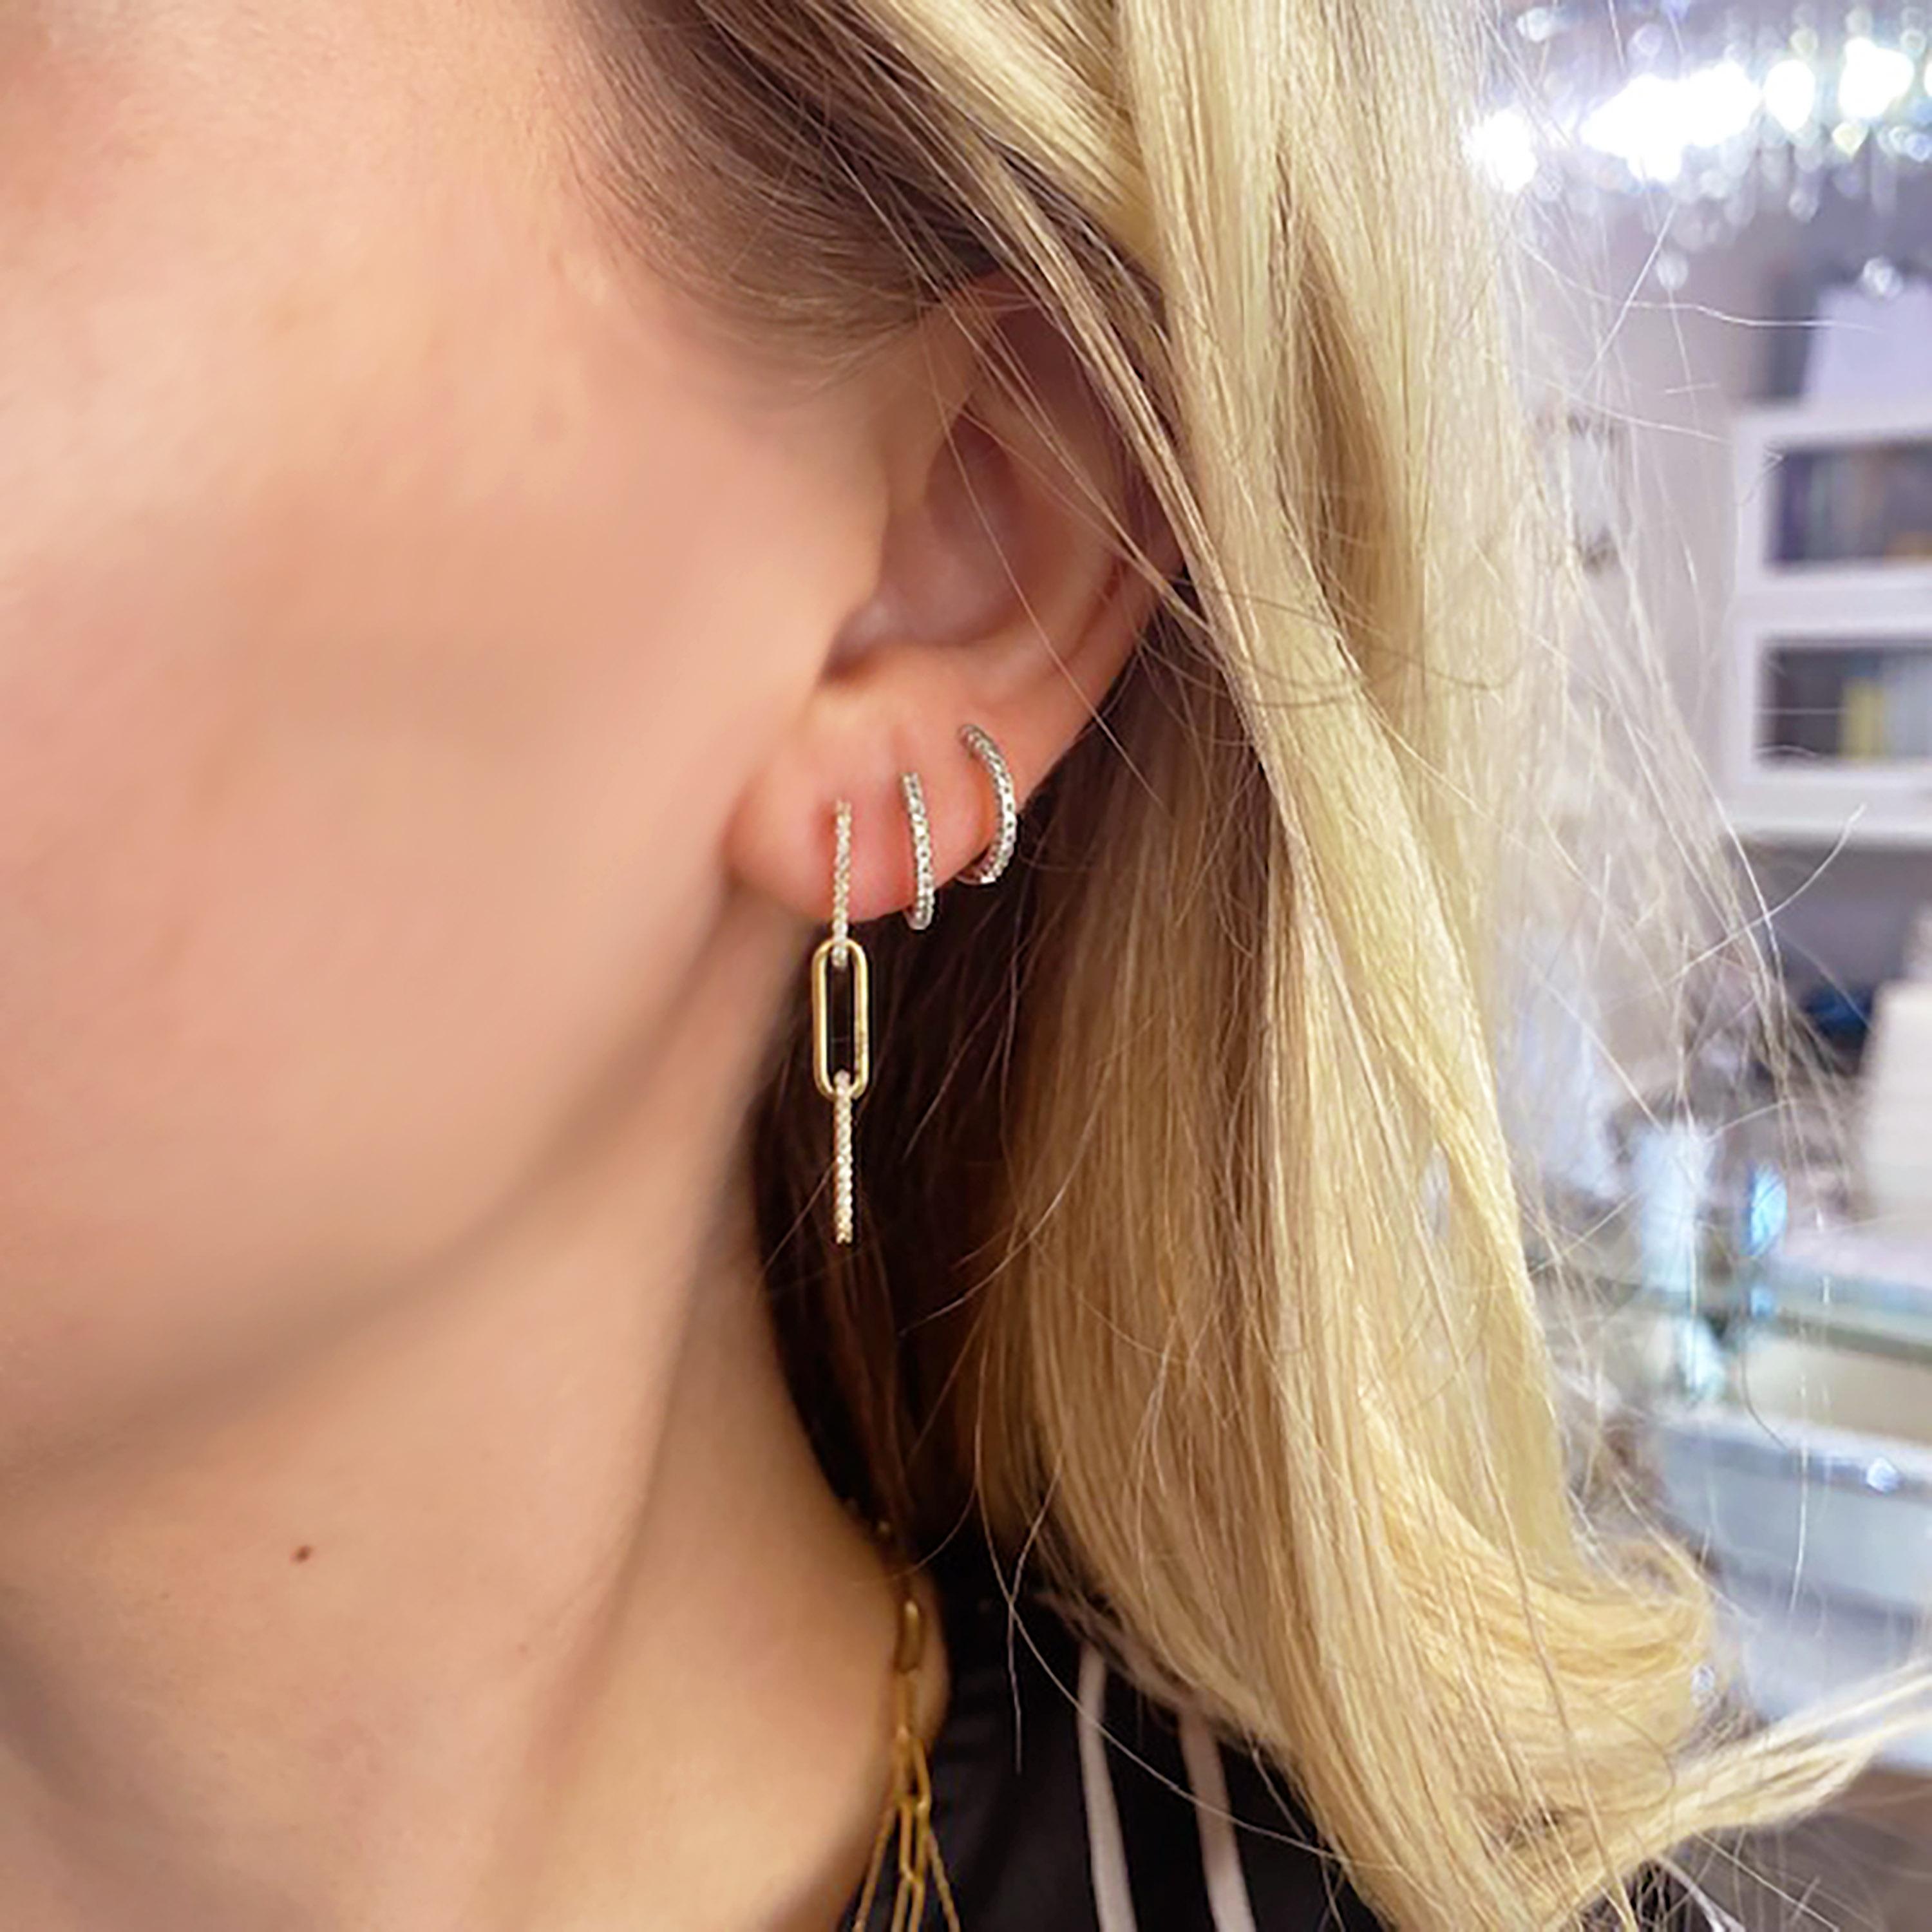 These diamond paperclip earrings have 52 full cut diamonds and are set in 14 karat yellow gold. These brilliantly designed earrings will go with your link or paperclip necklace! Feel like a million dollars when you wear these earrings.
Material: 14K